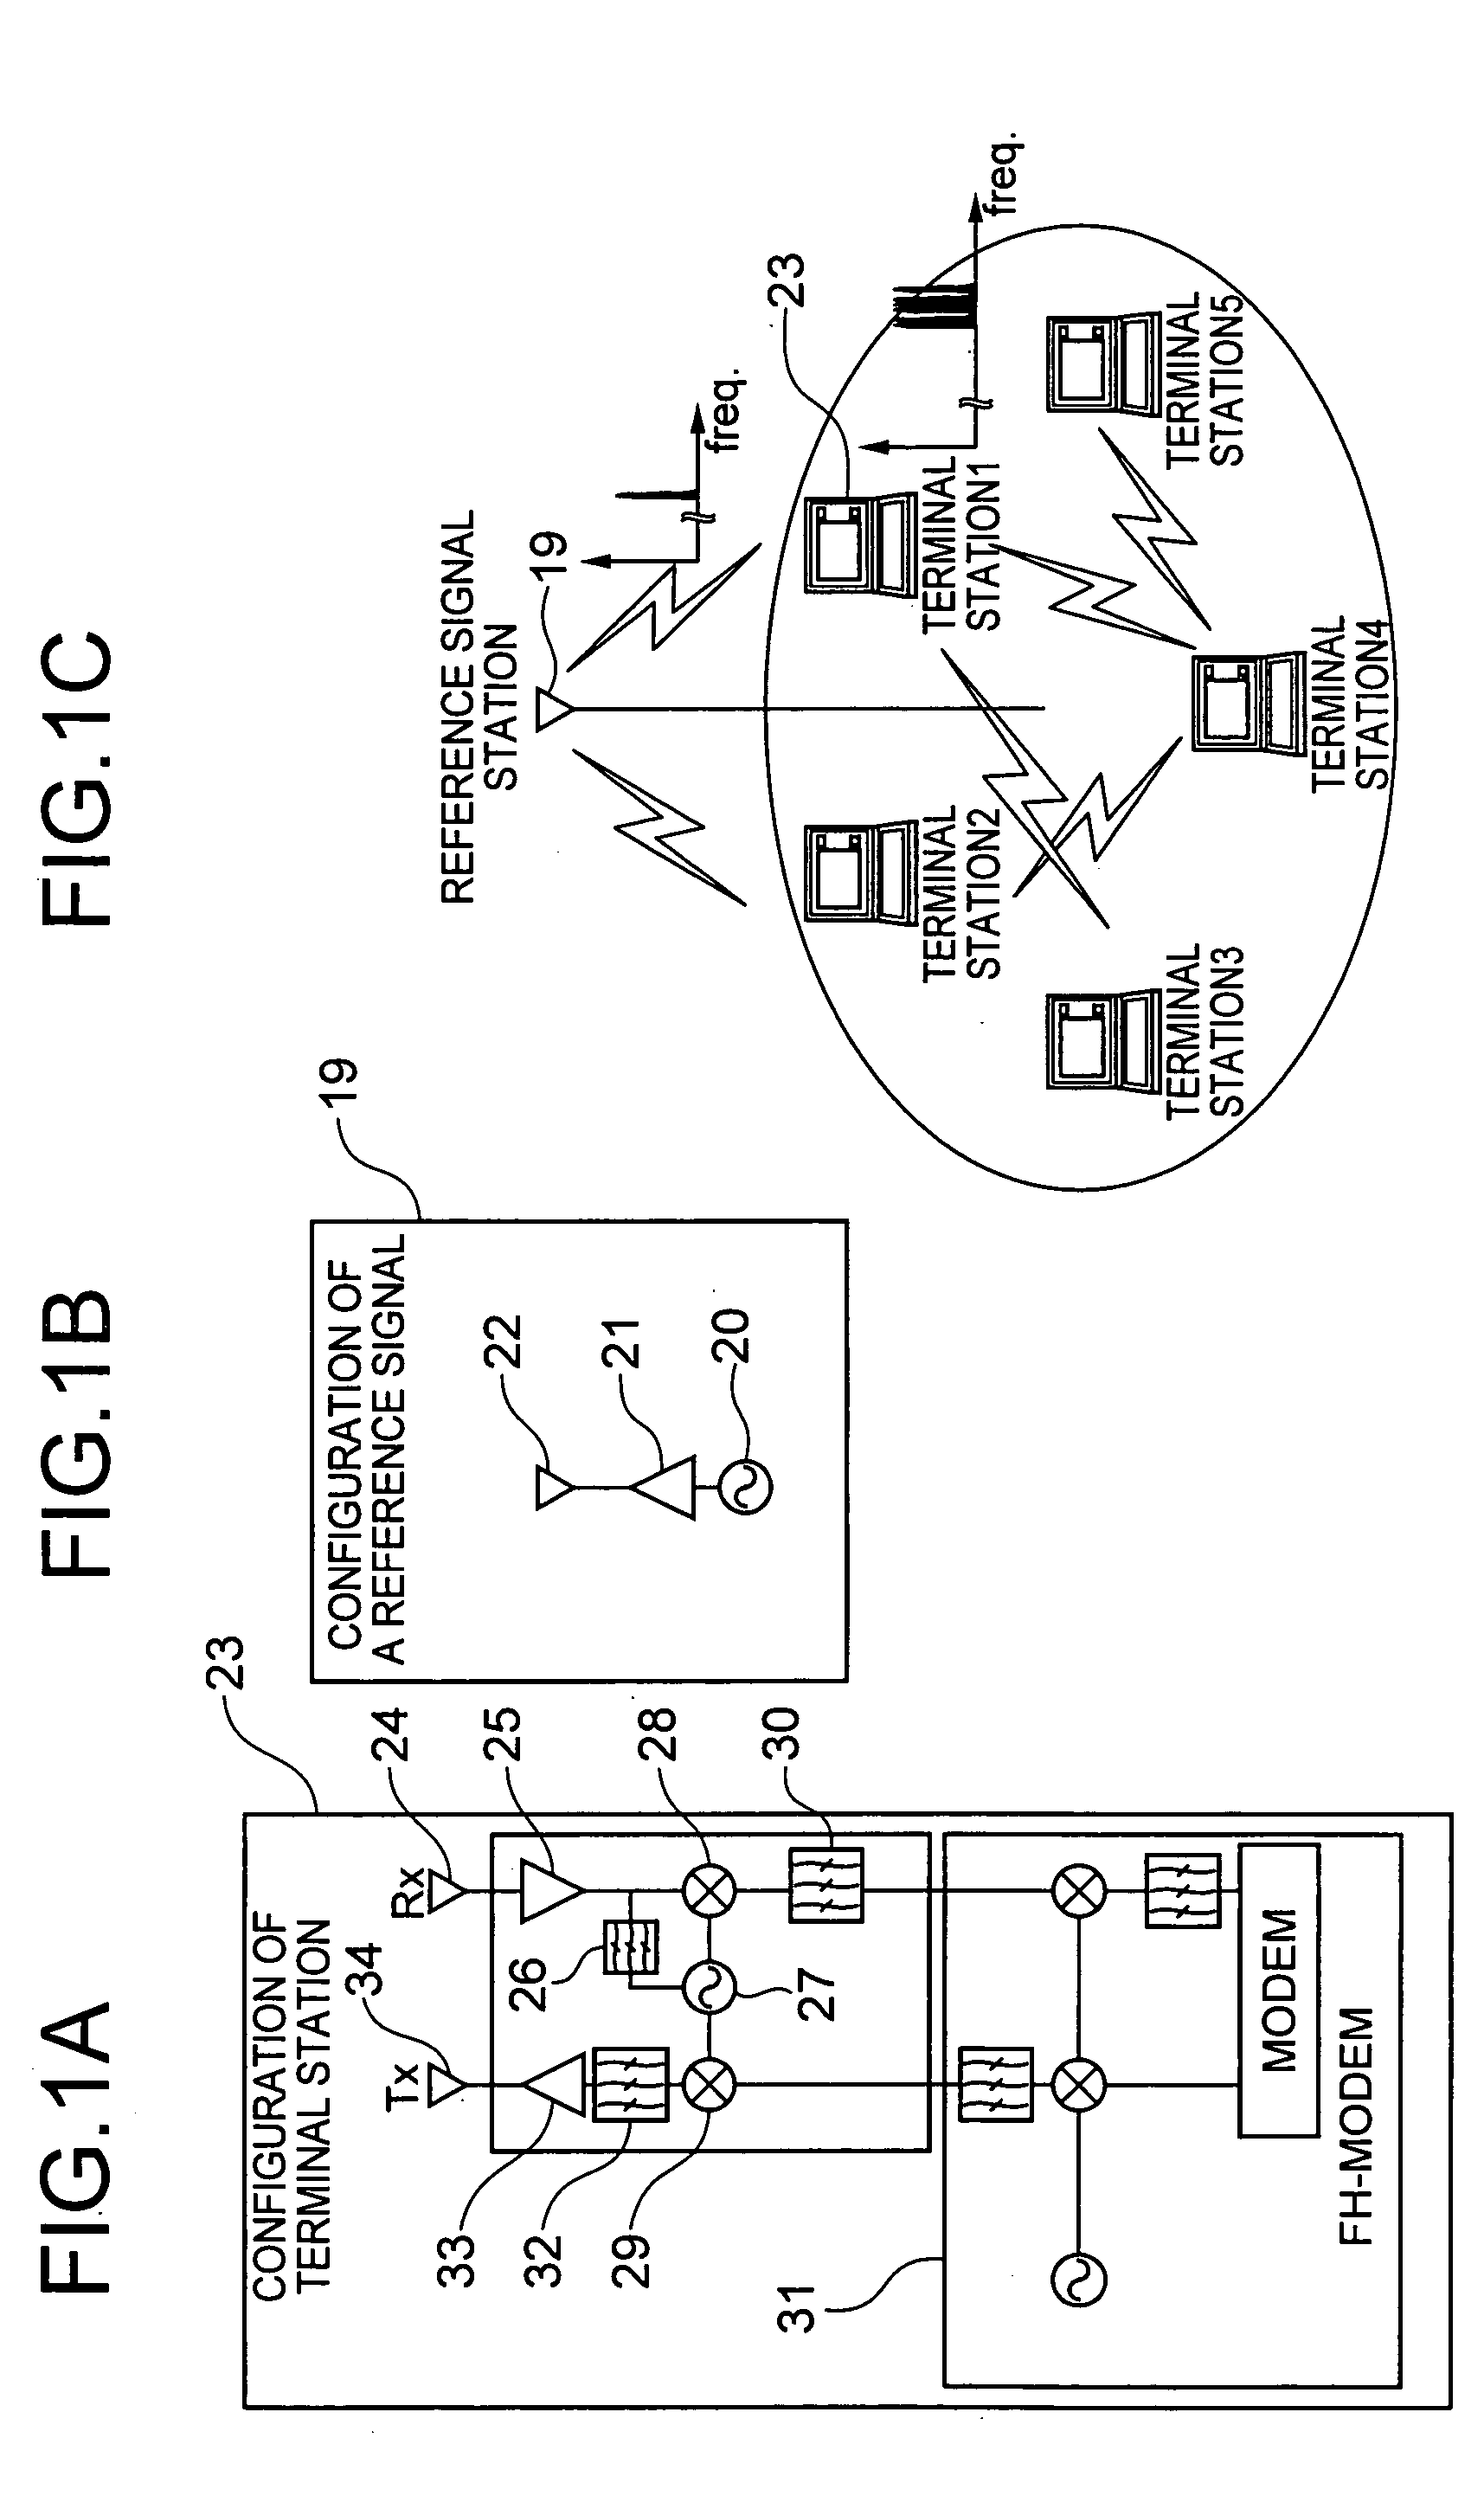 Method and system for frequency hopping radio communication